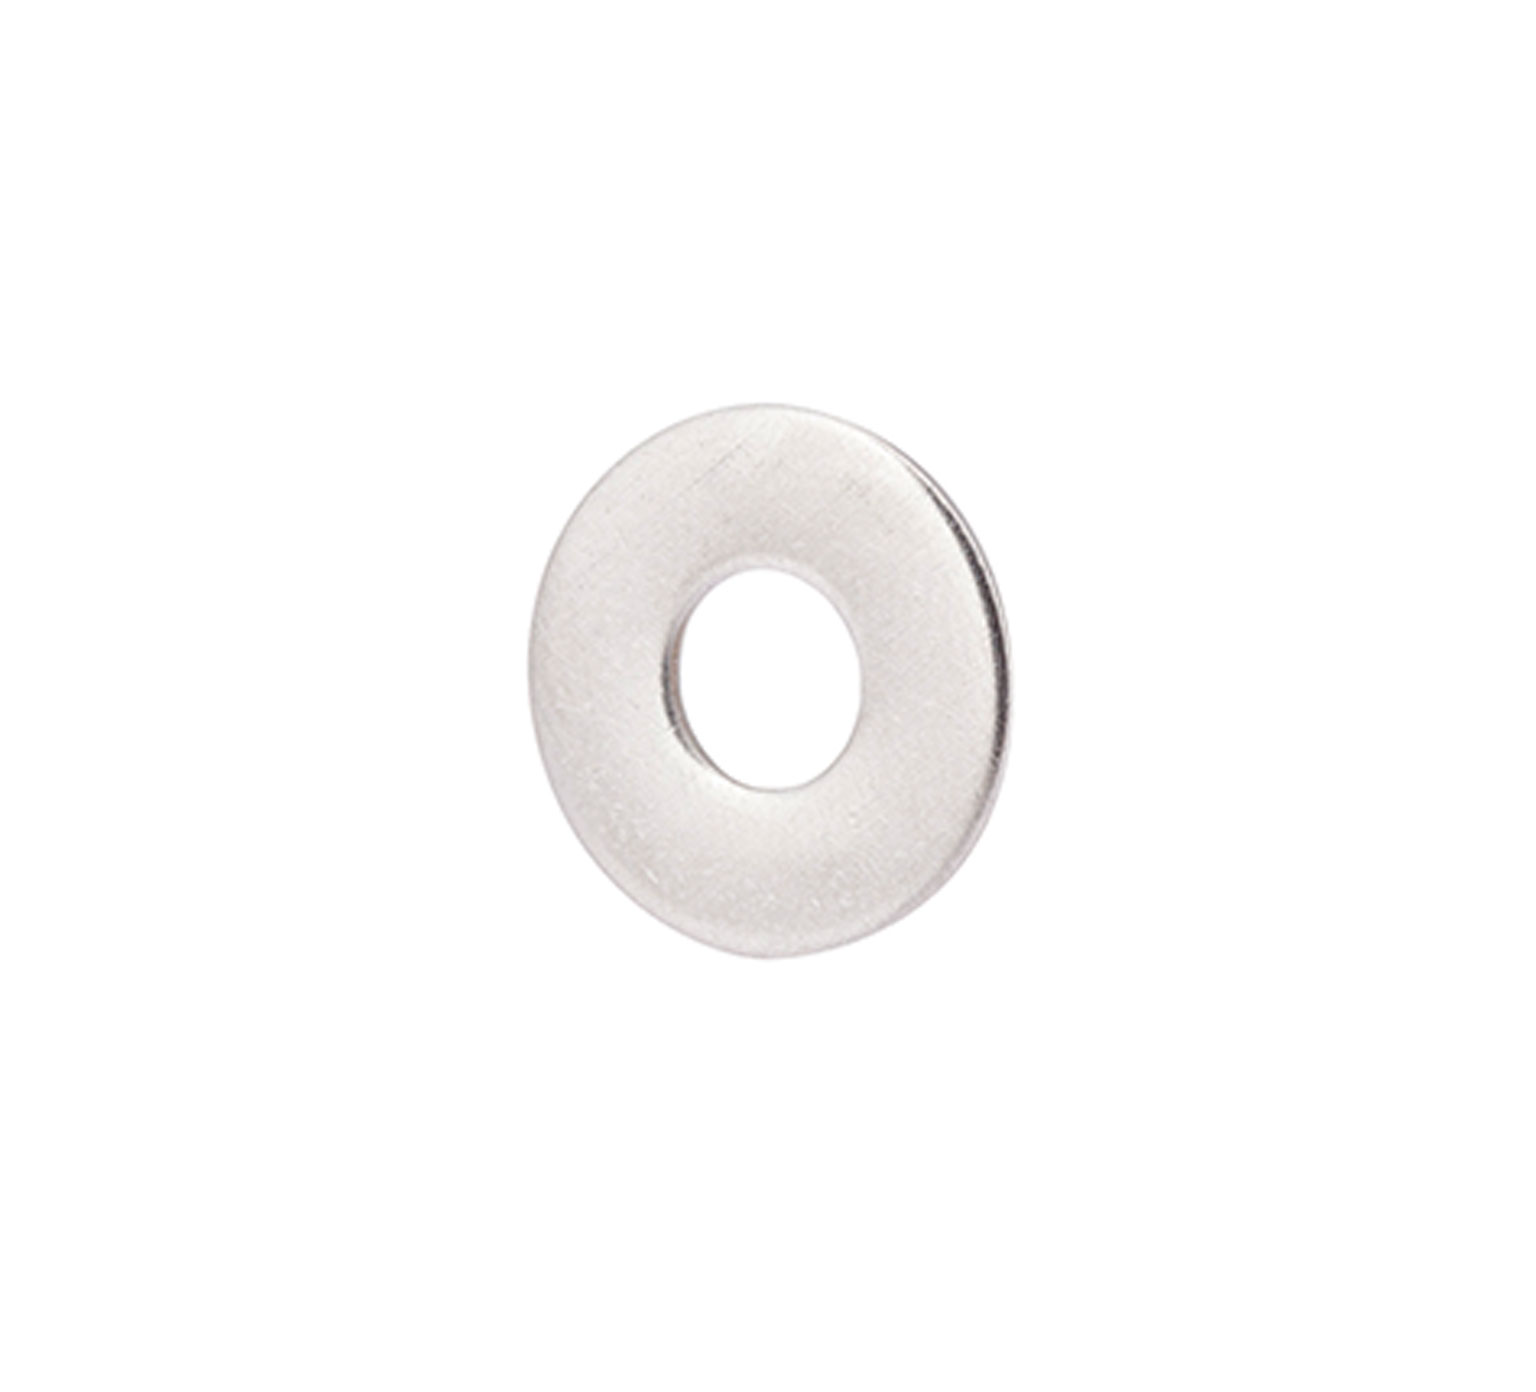 01684 Stainless Steel Washer - 0.265 ID x .688 OD x 0.5 in alt 1